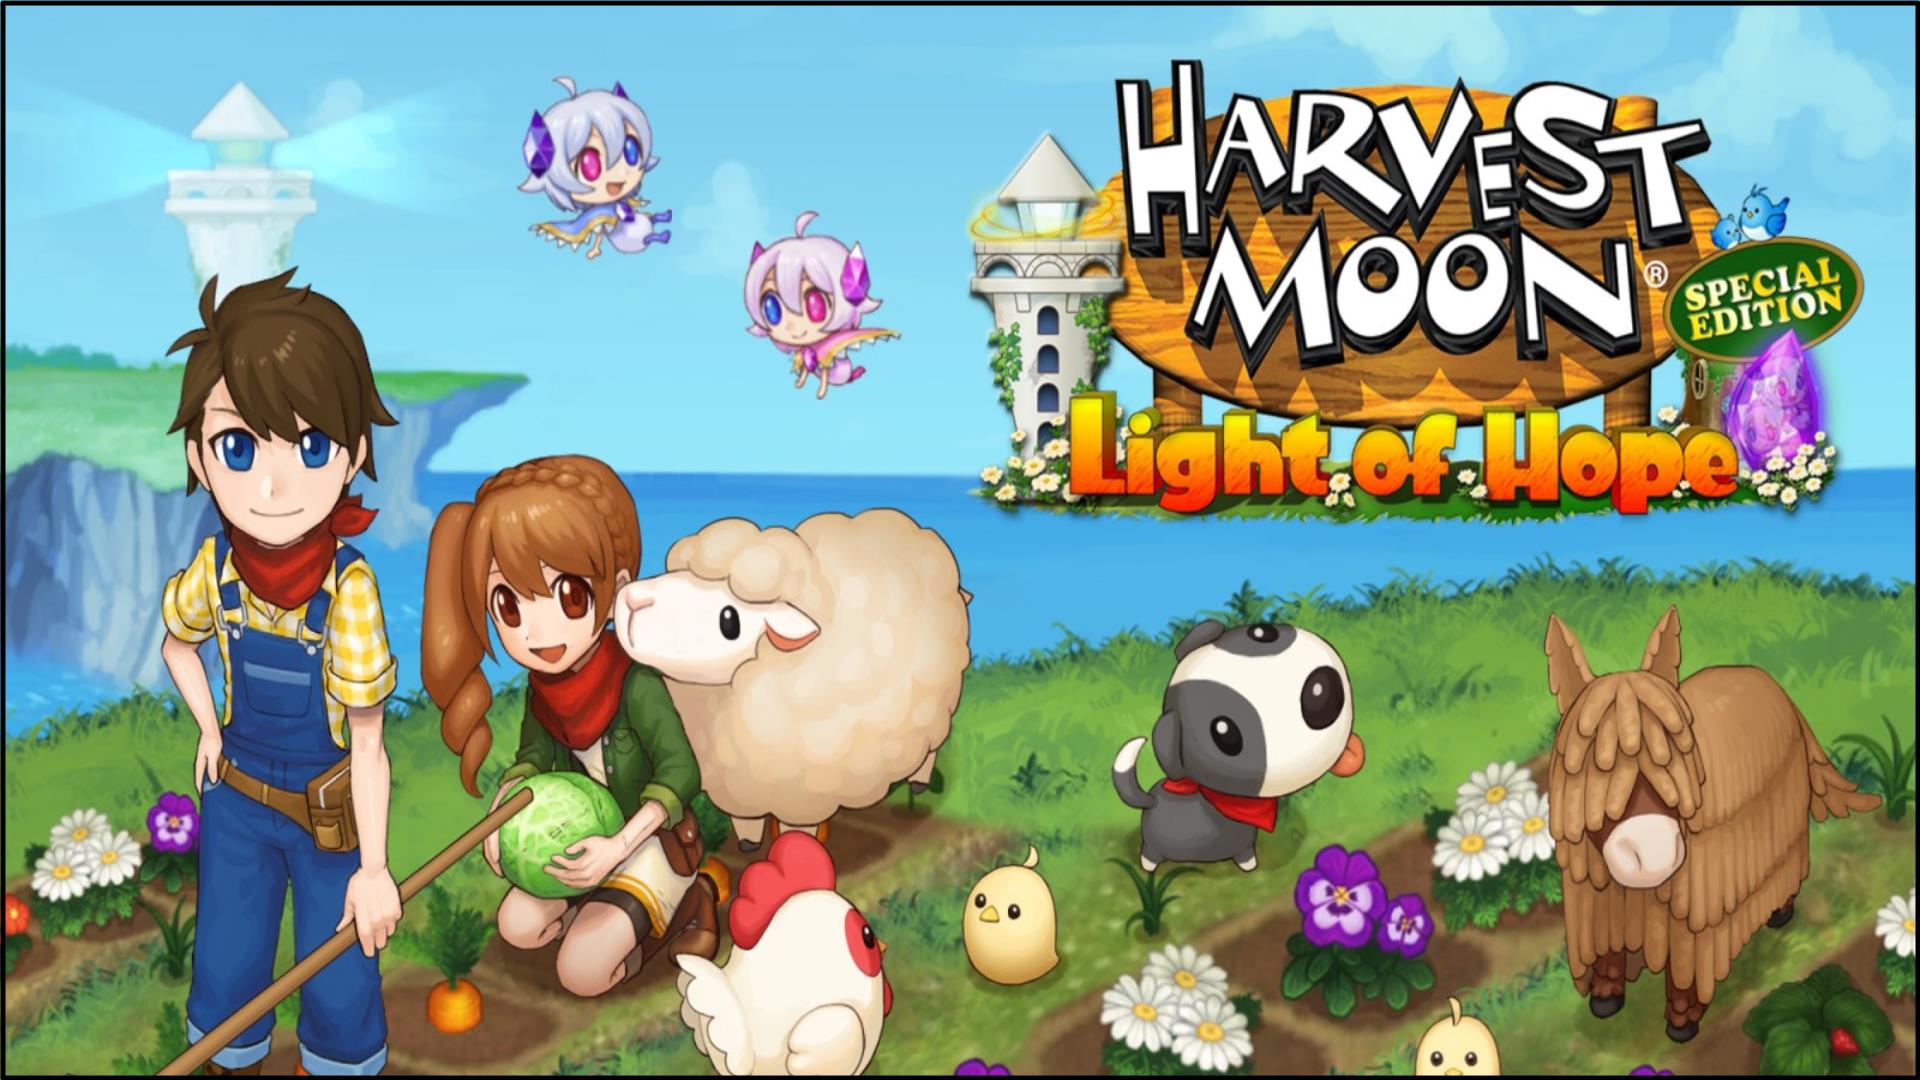 4 Harvest Moon Light of Hope Special Edition